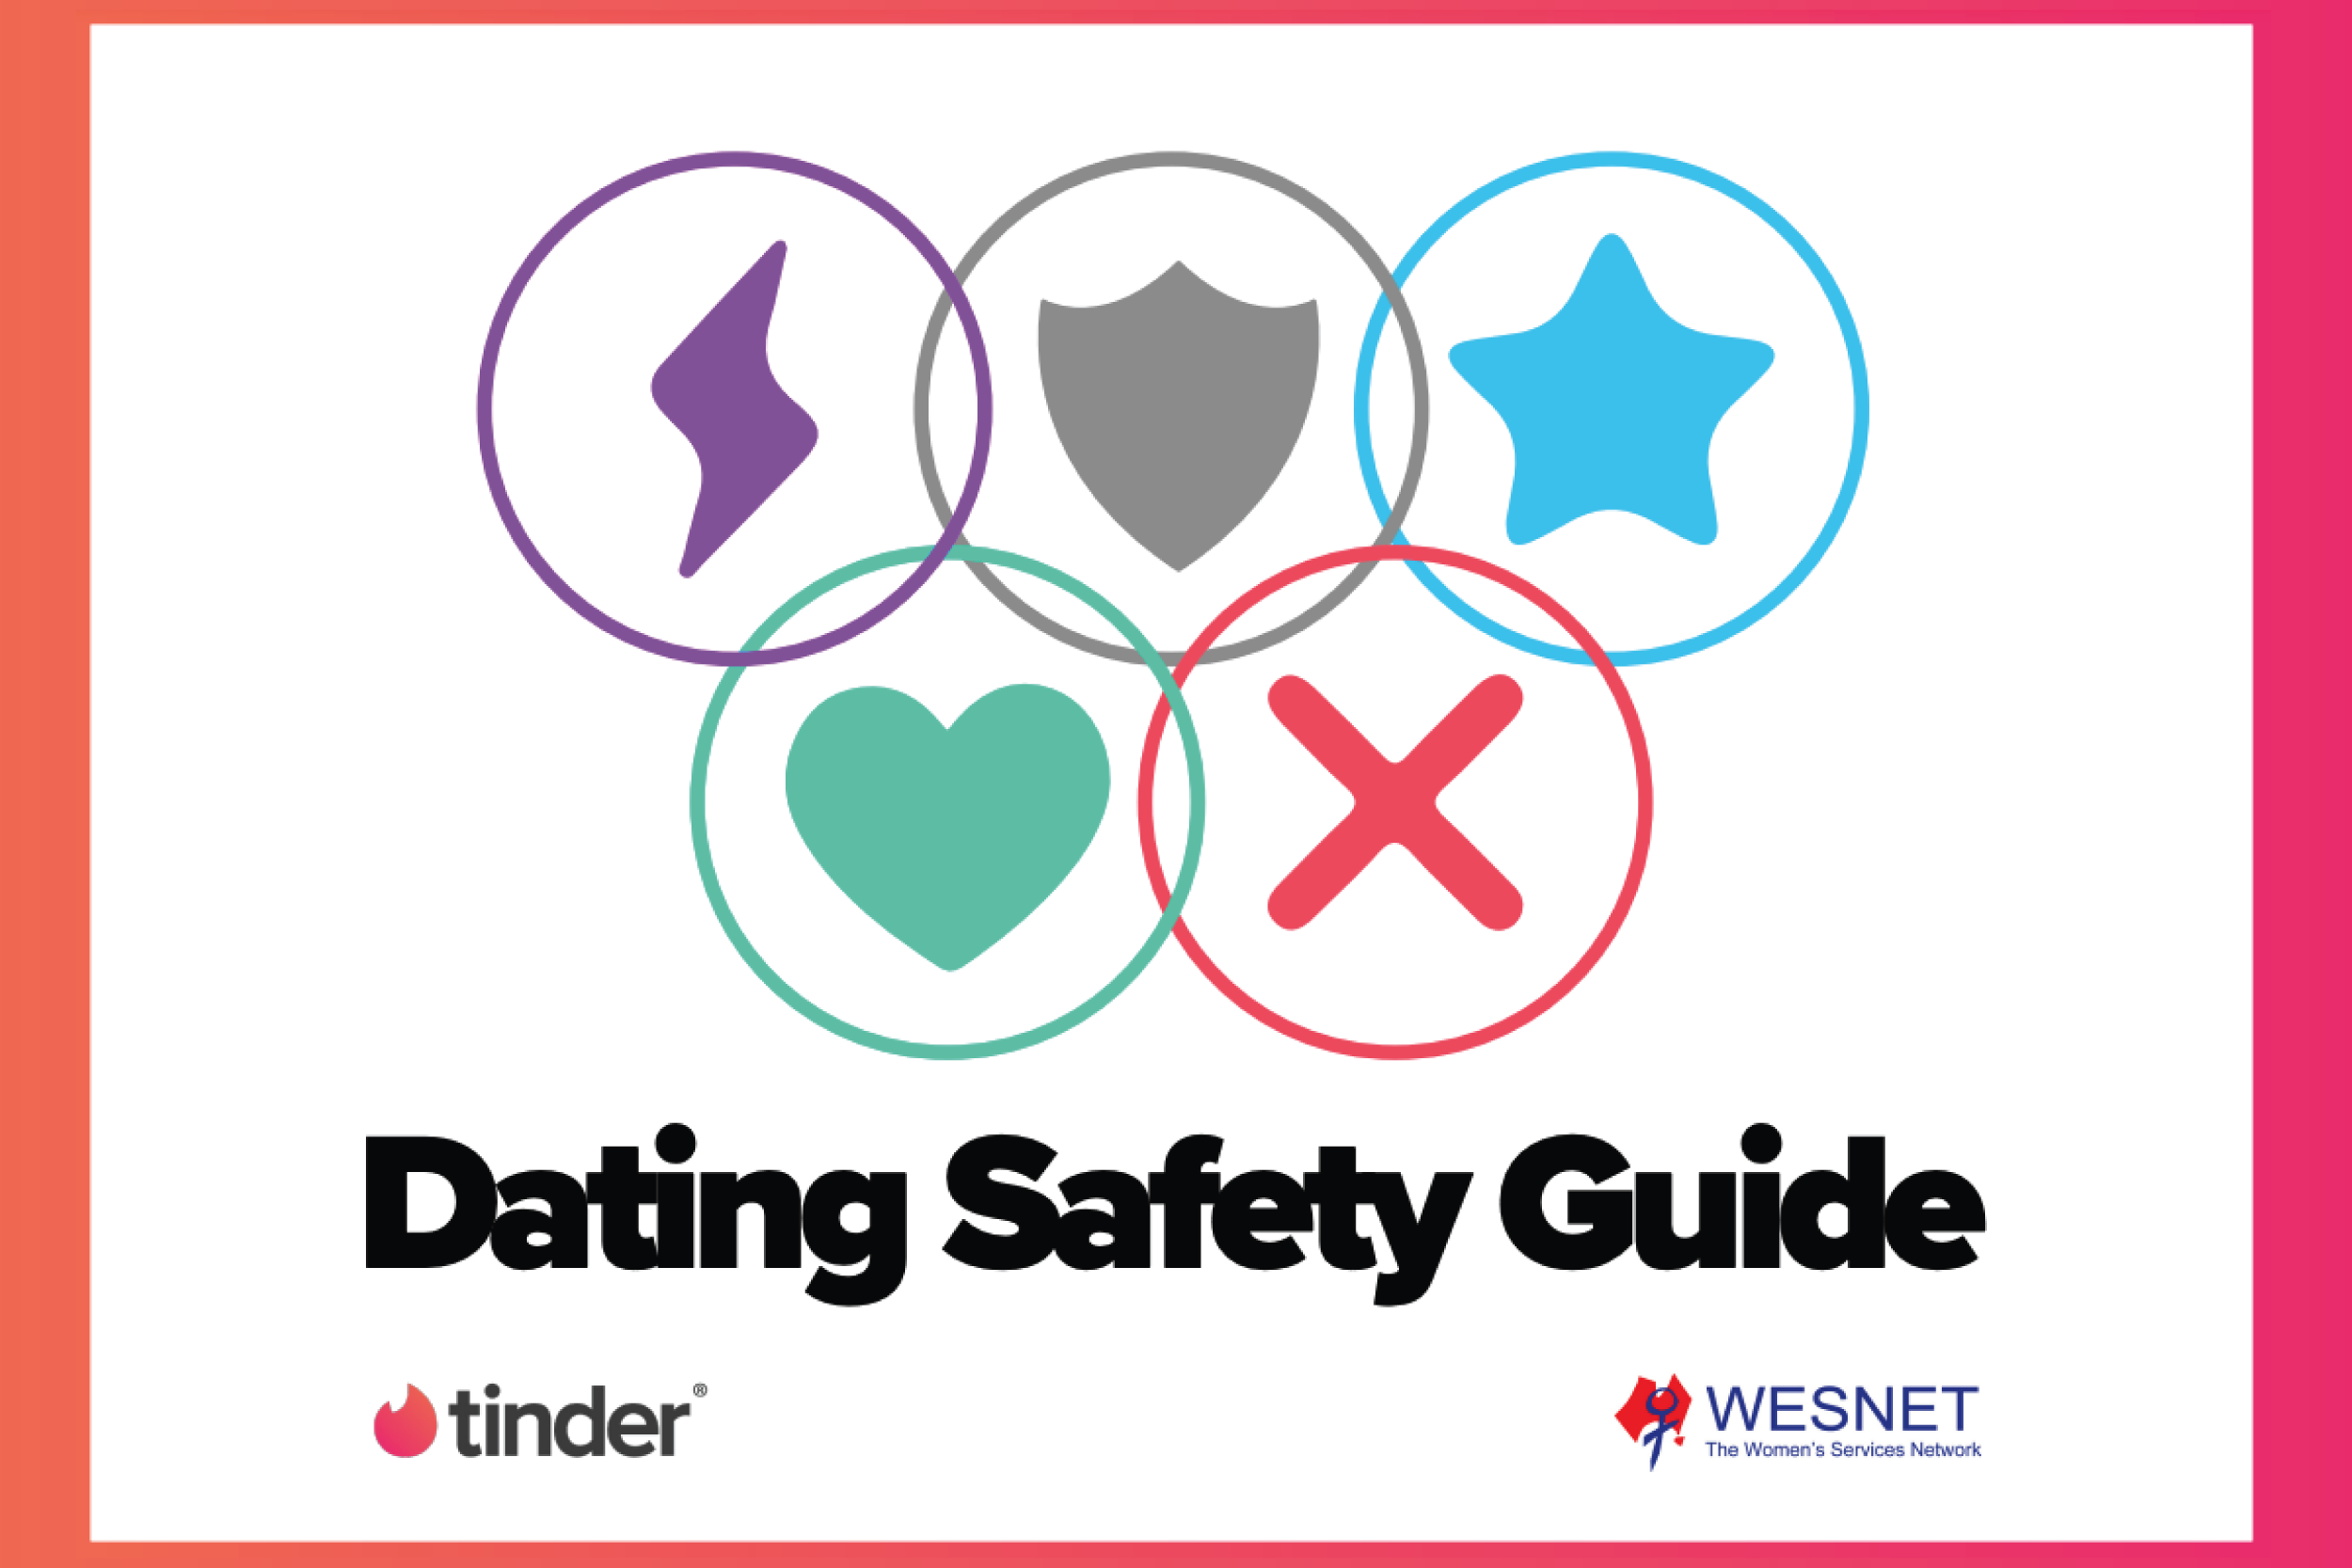 Dating Safety Guide Cover